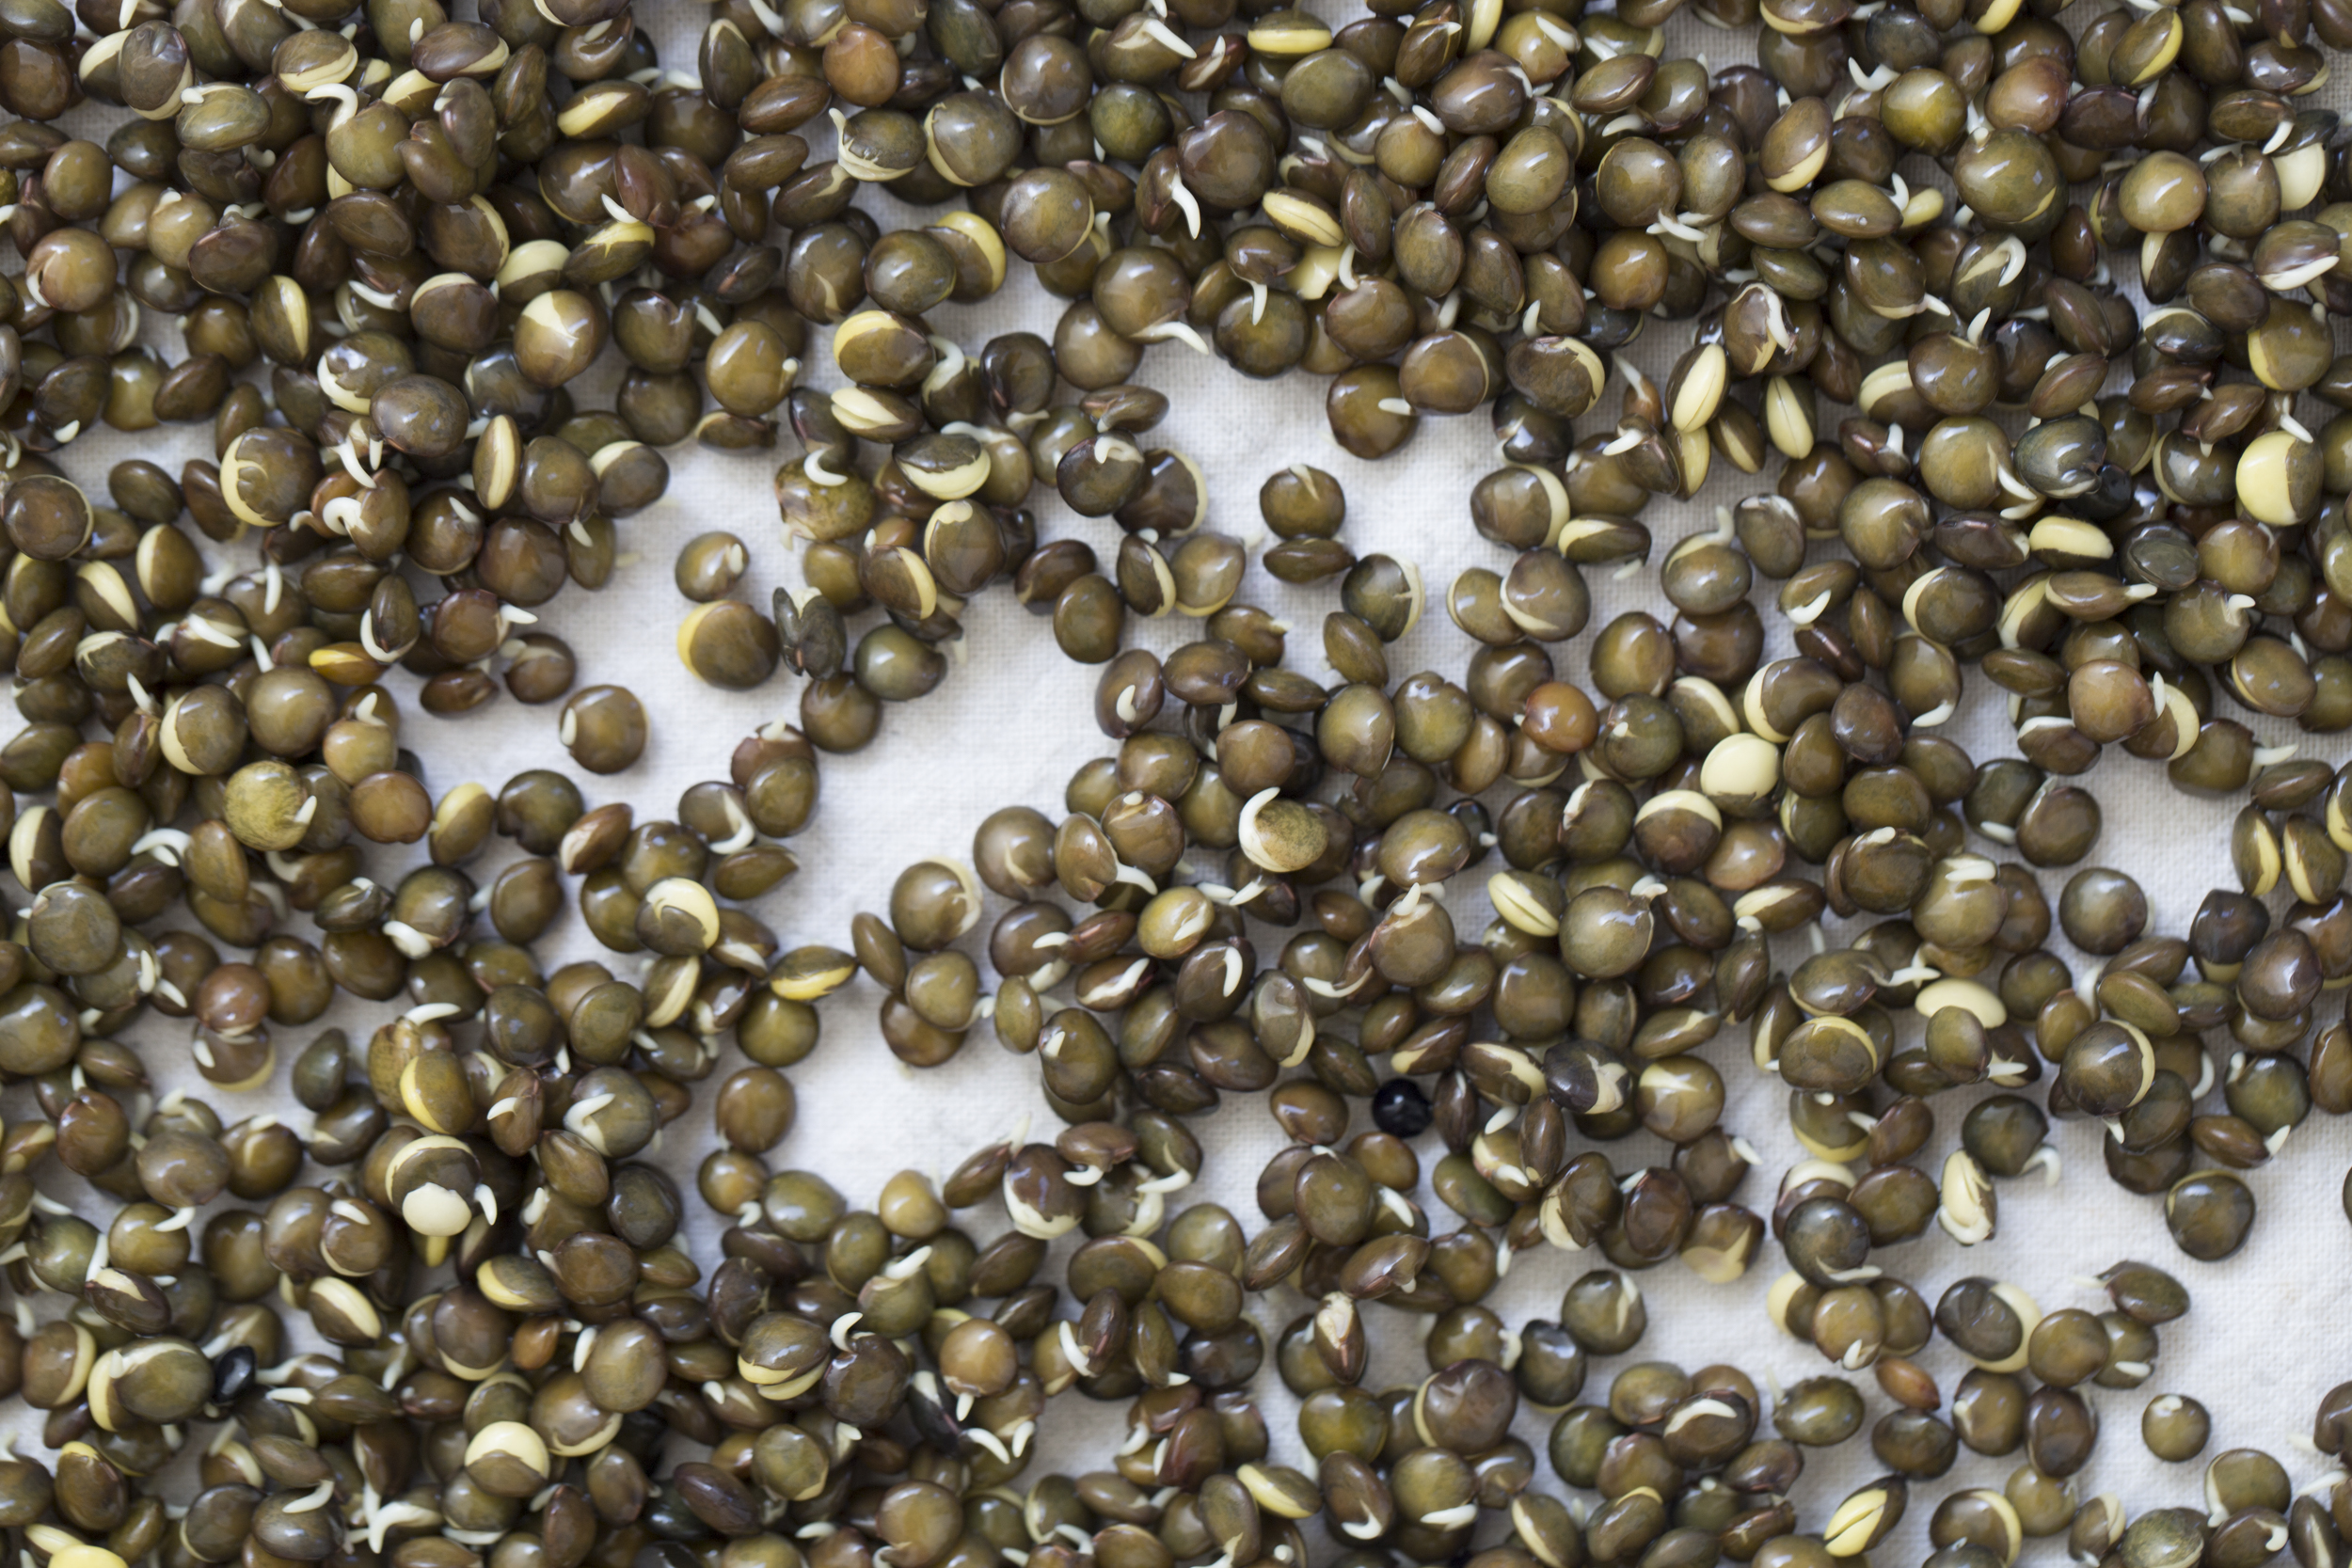 Sprouted Legumes…It’s Something To Do!